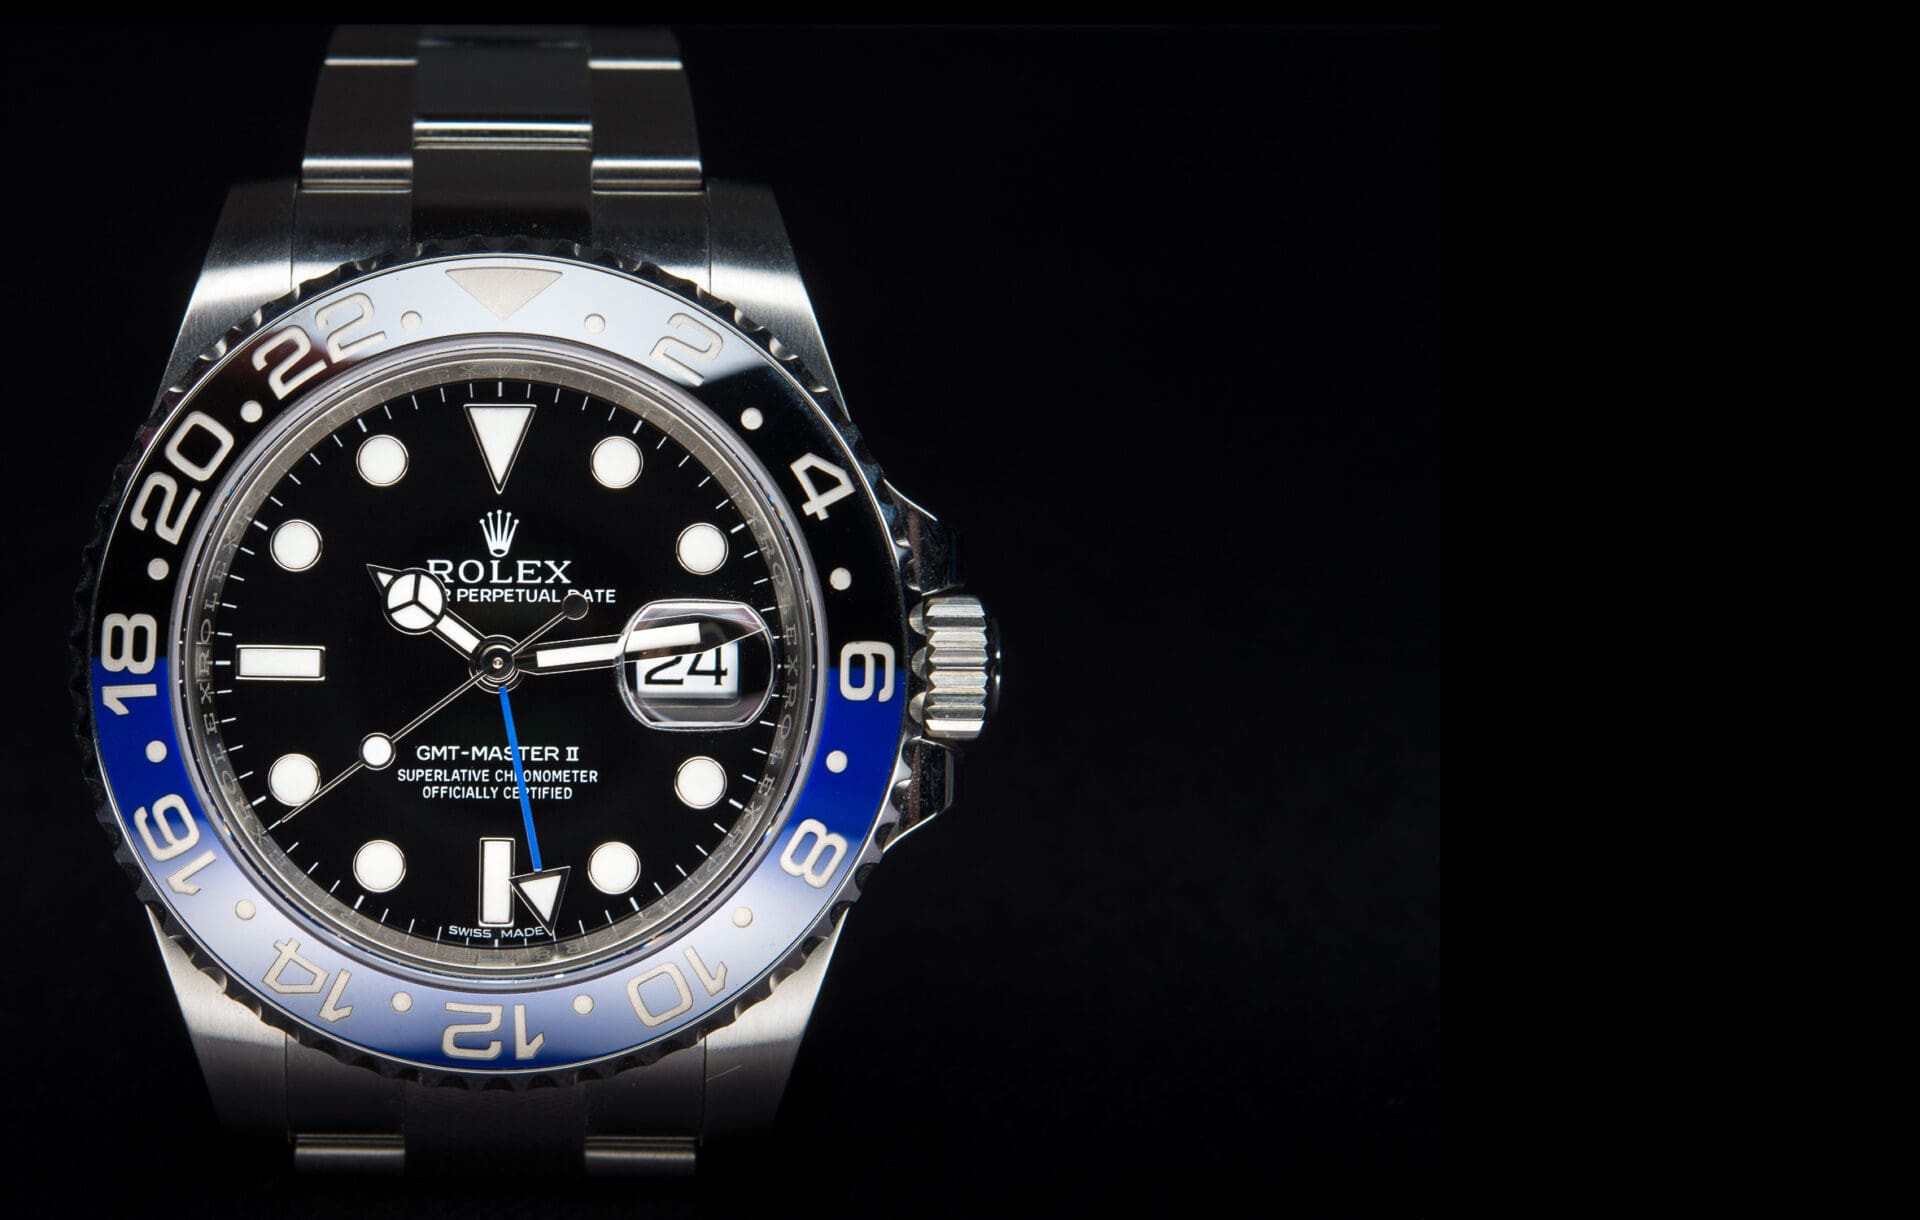 IN-DEPTH: The Rolex GMT Master II BLNR review